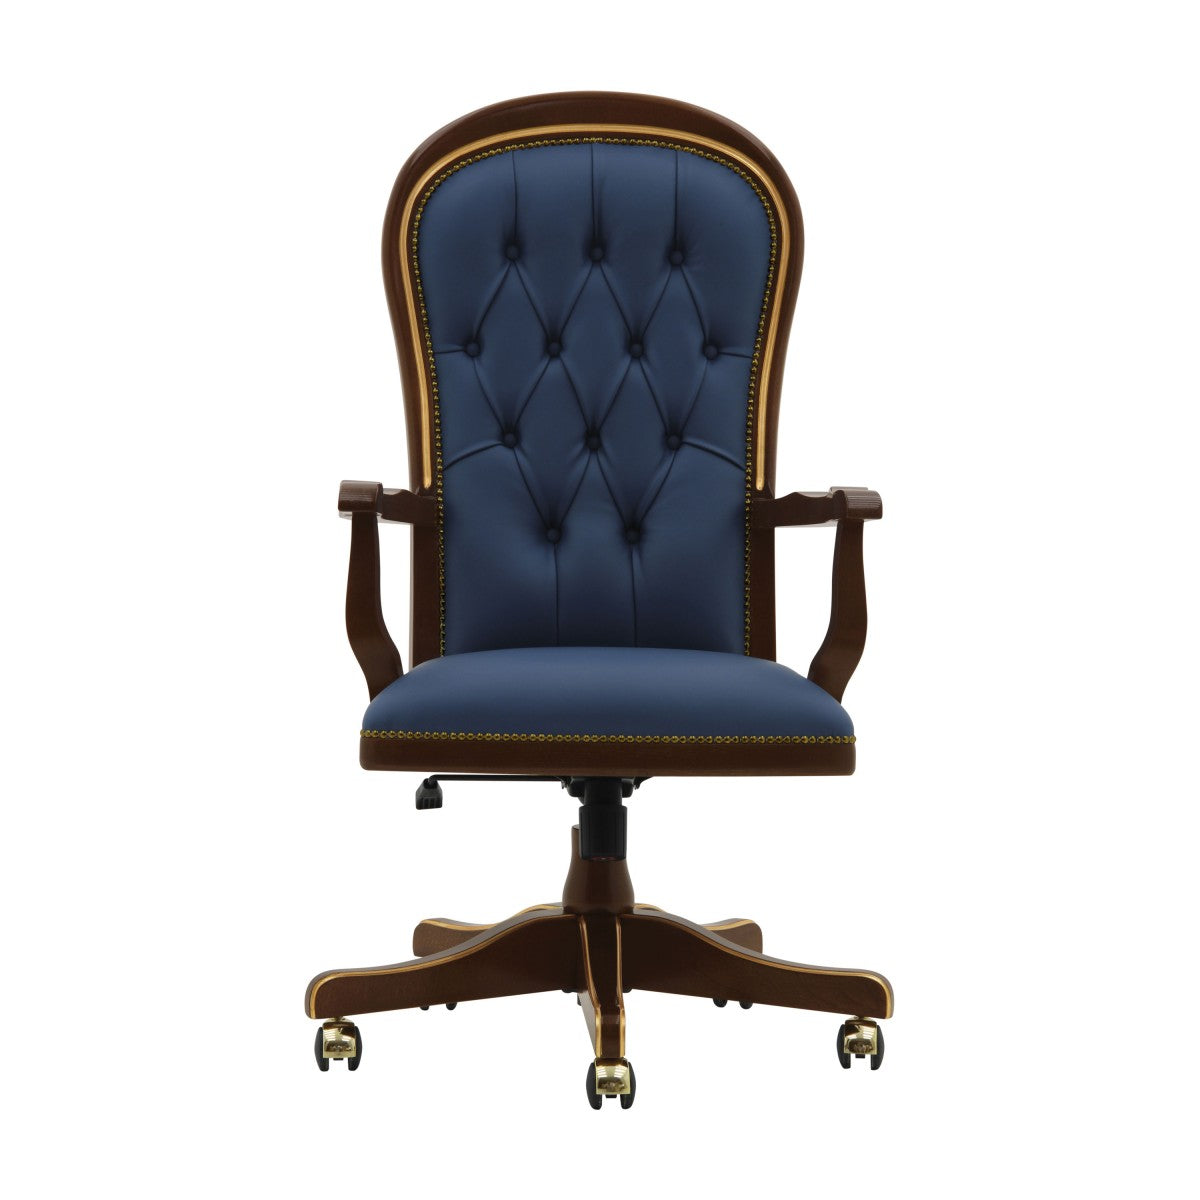 Diderot Bespoke Upholstered Luxury Executive Swivel Office Desk Chair MS316P Custom Made To Order